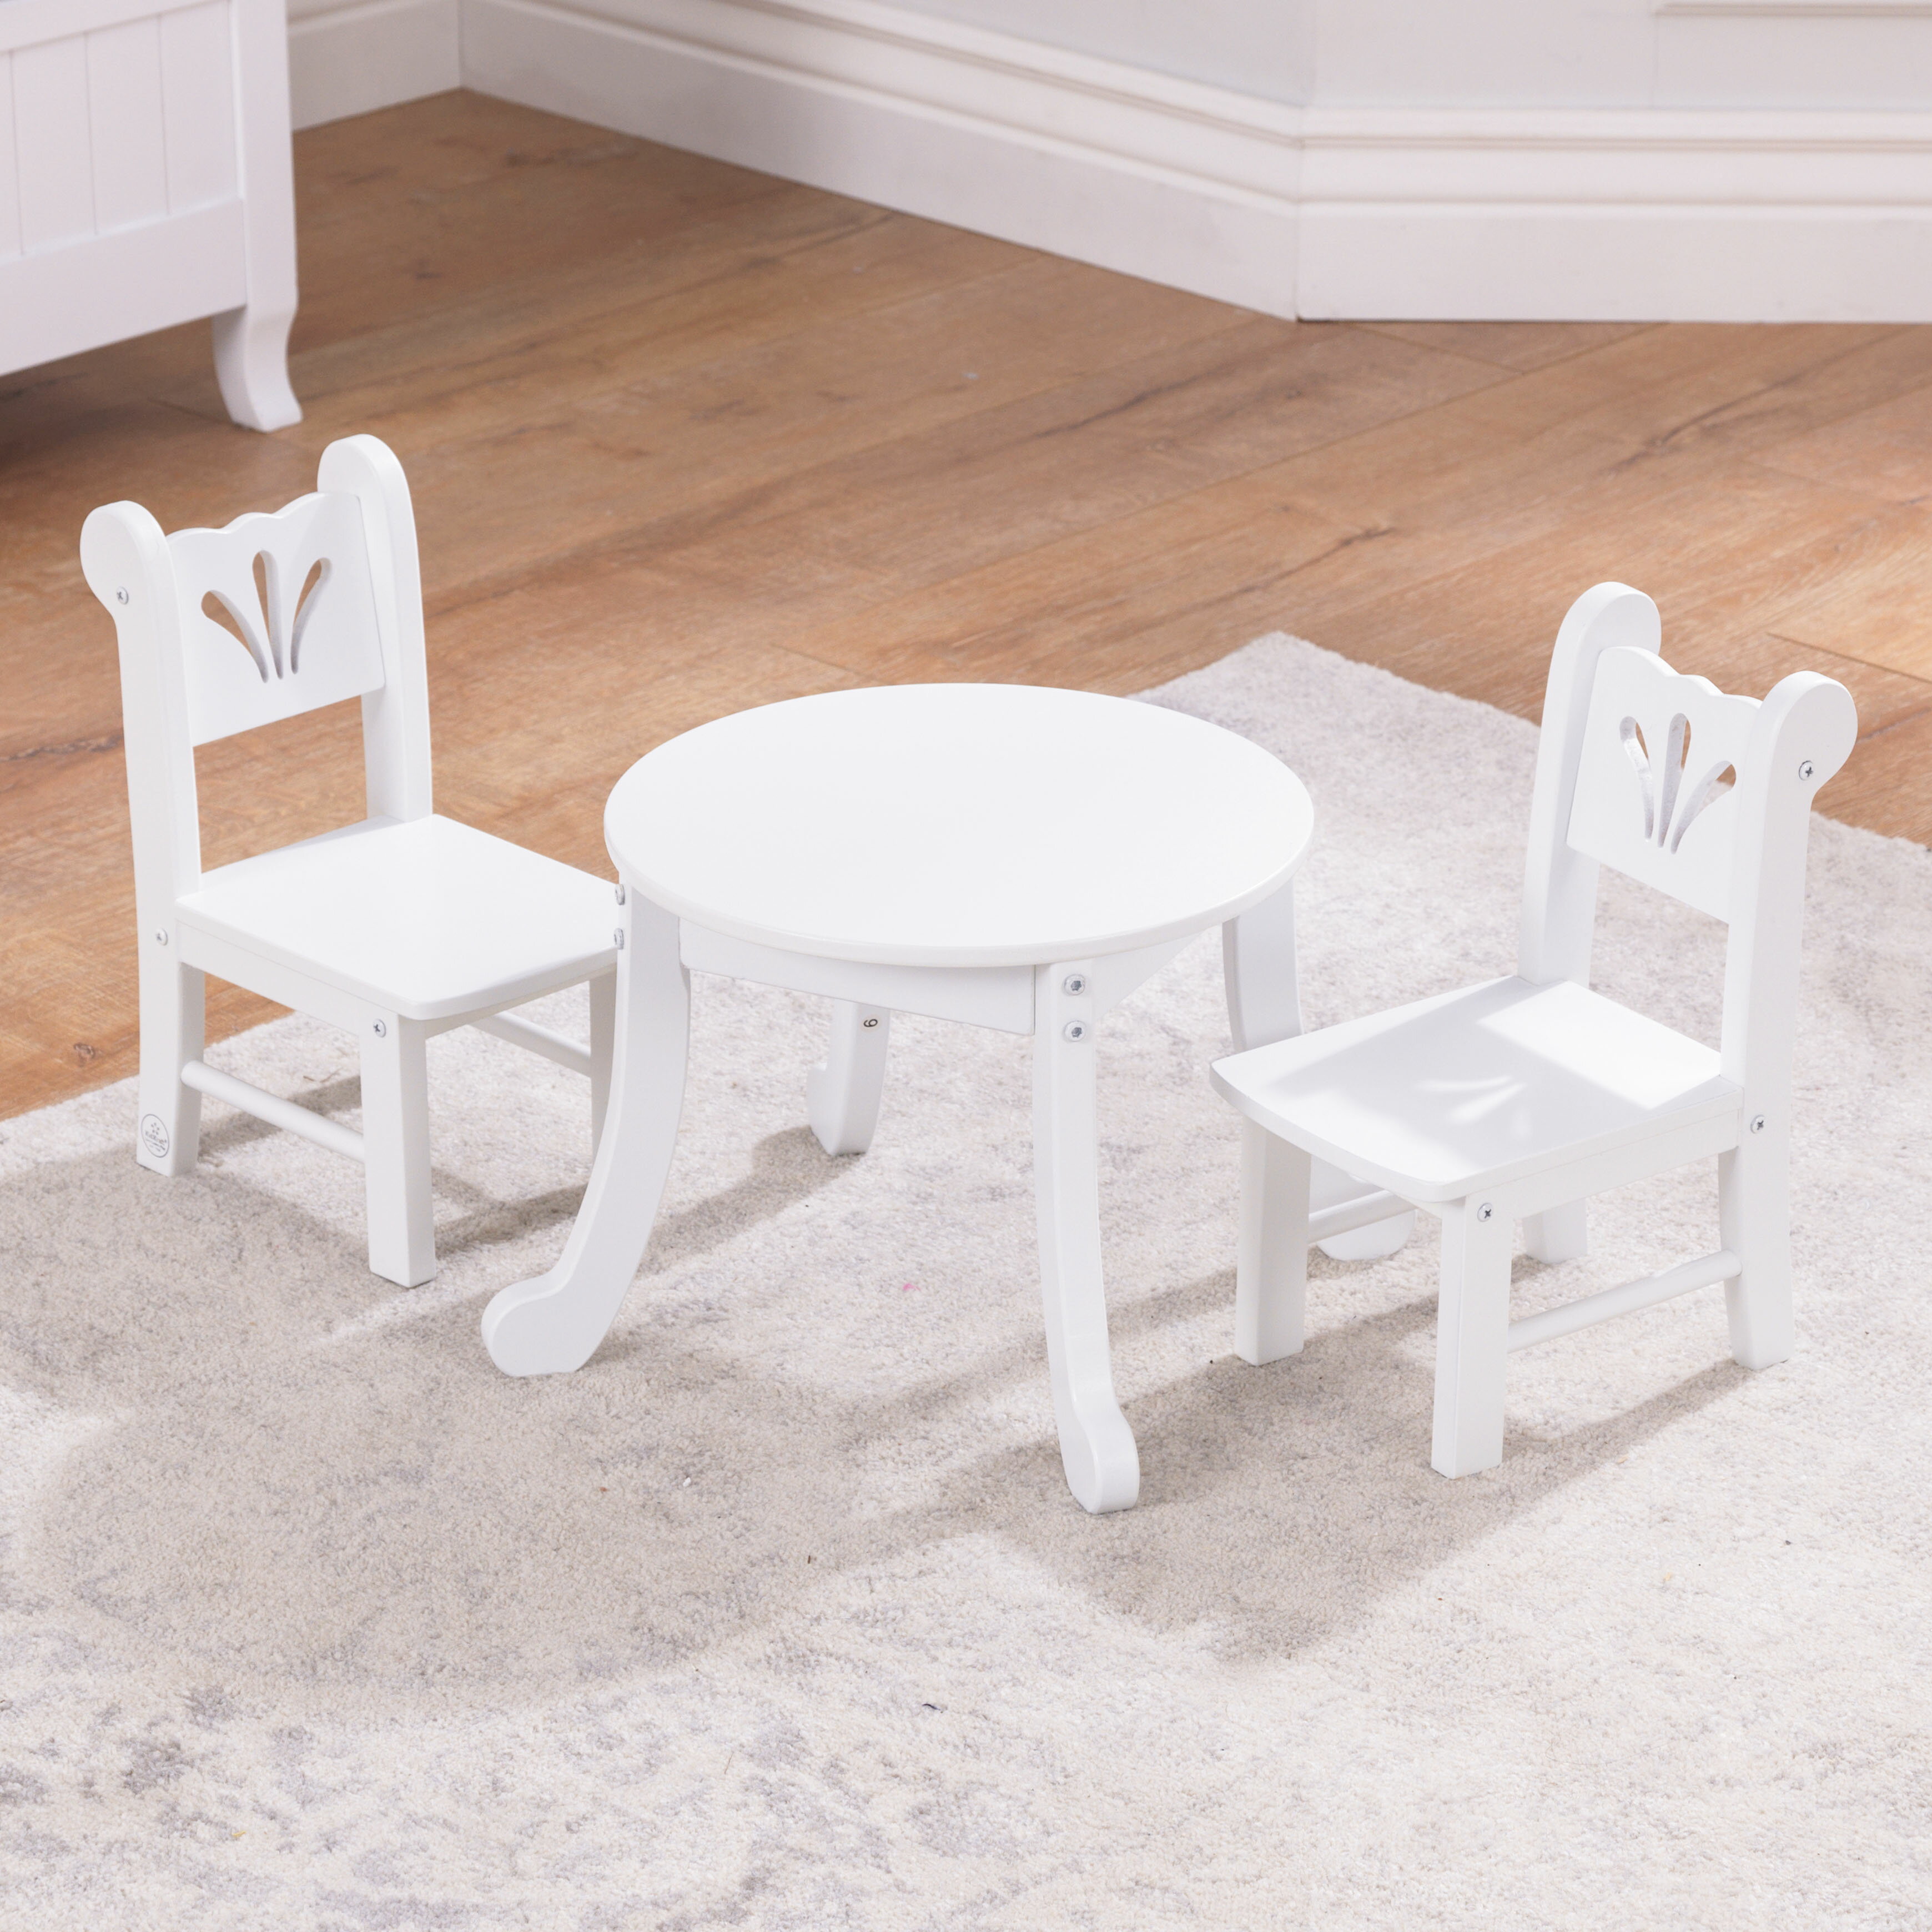 kidkraft doll table and chairs